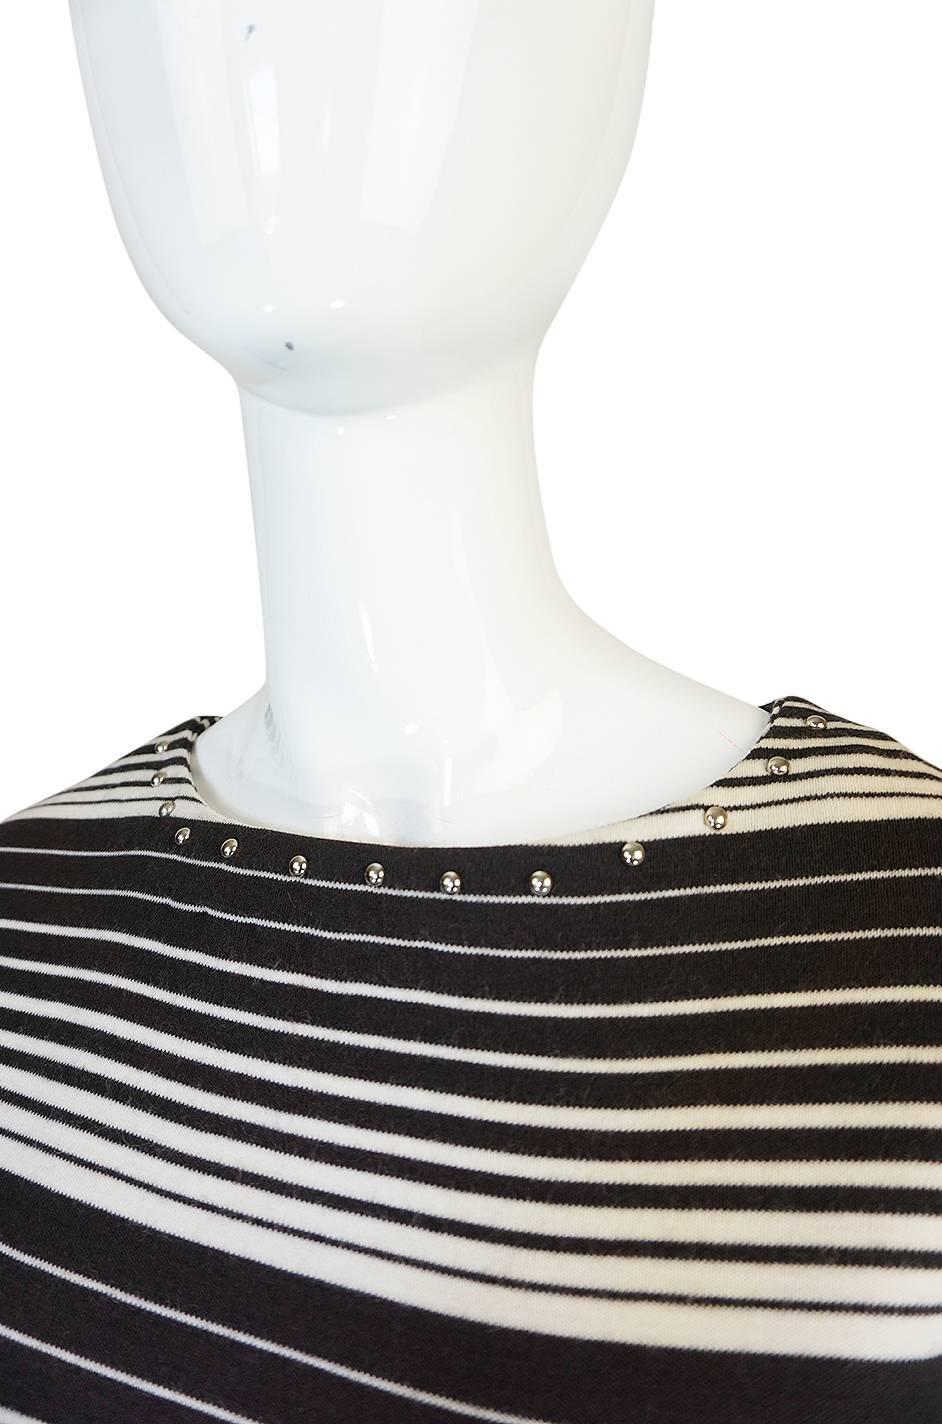 1970s Givenchy Graphic Striped & Studded Caftan Dress 3